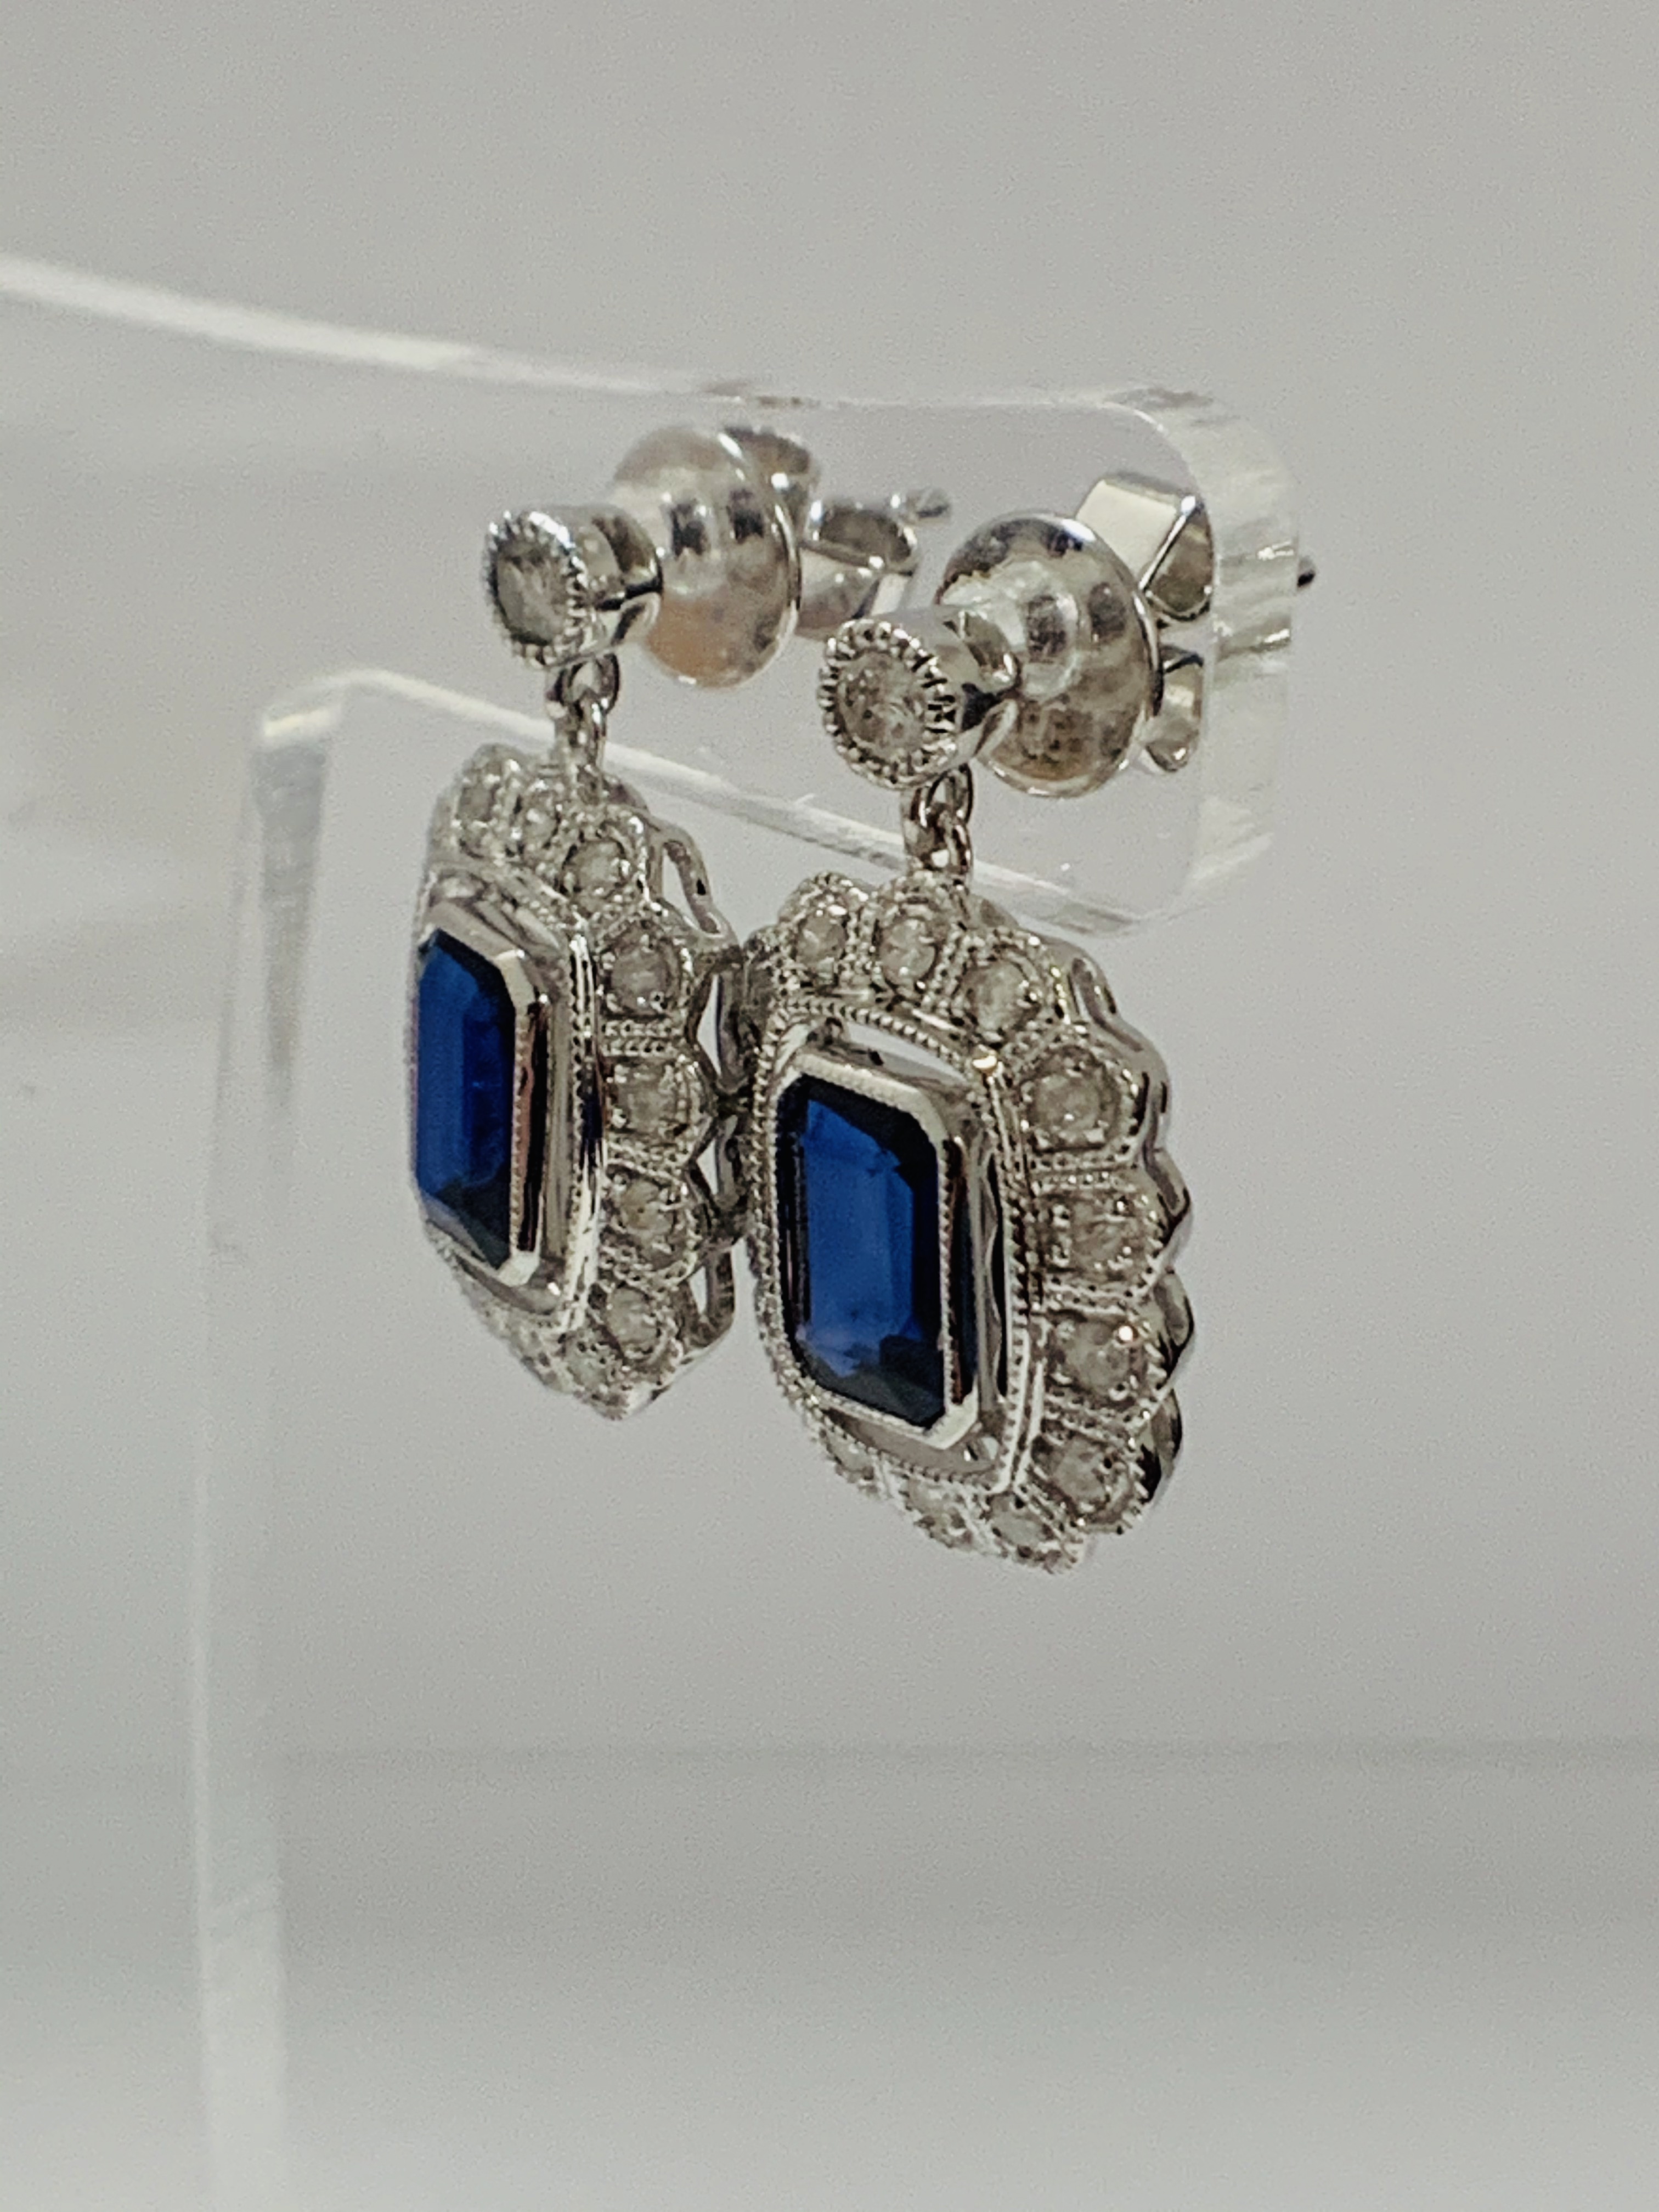 14ct White Gold Sapphire and Diamond earrings featuring, 2 cushion cut, blue Sapphires (2.24ct TSW), - Image 5 of 13